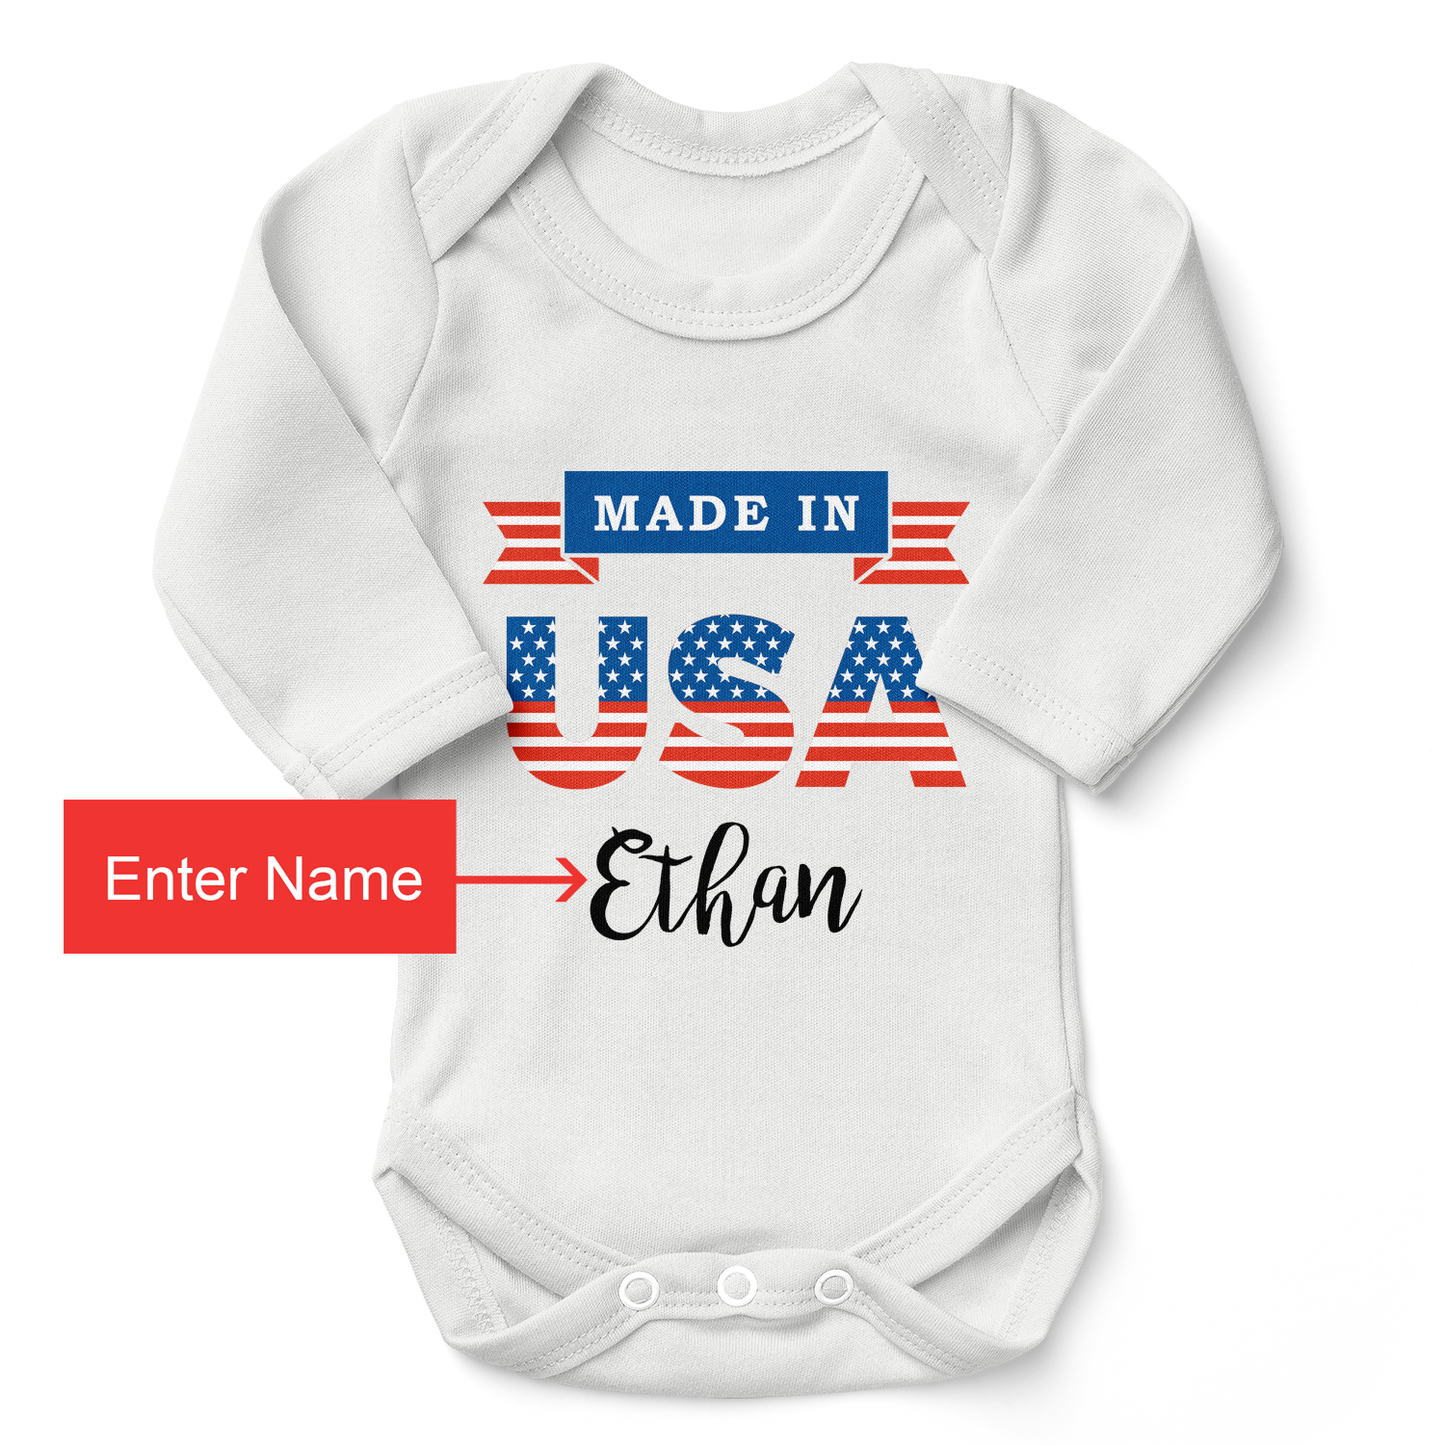 Personalized Organic Baby Bodysuit - Made in U.S.A (White / Long Sleeve)